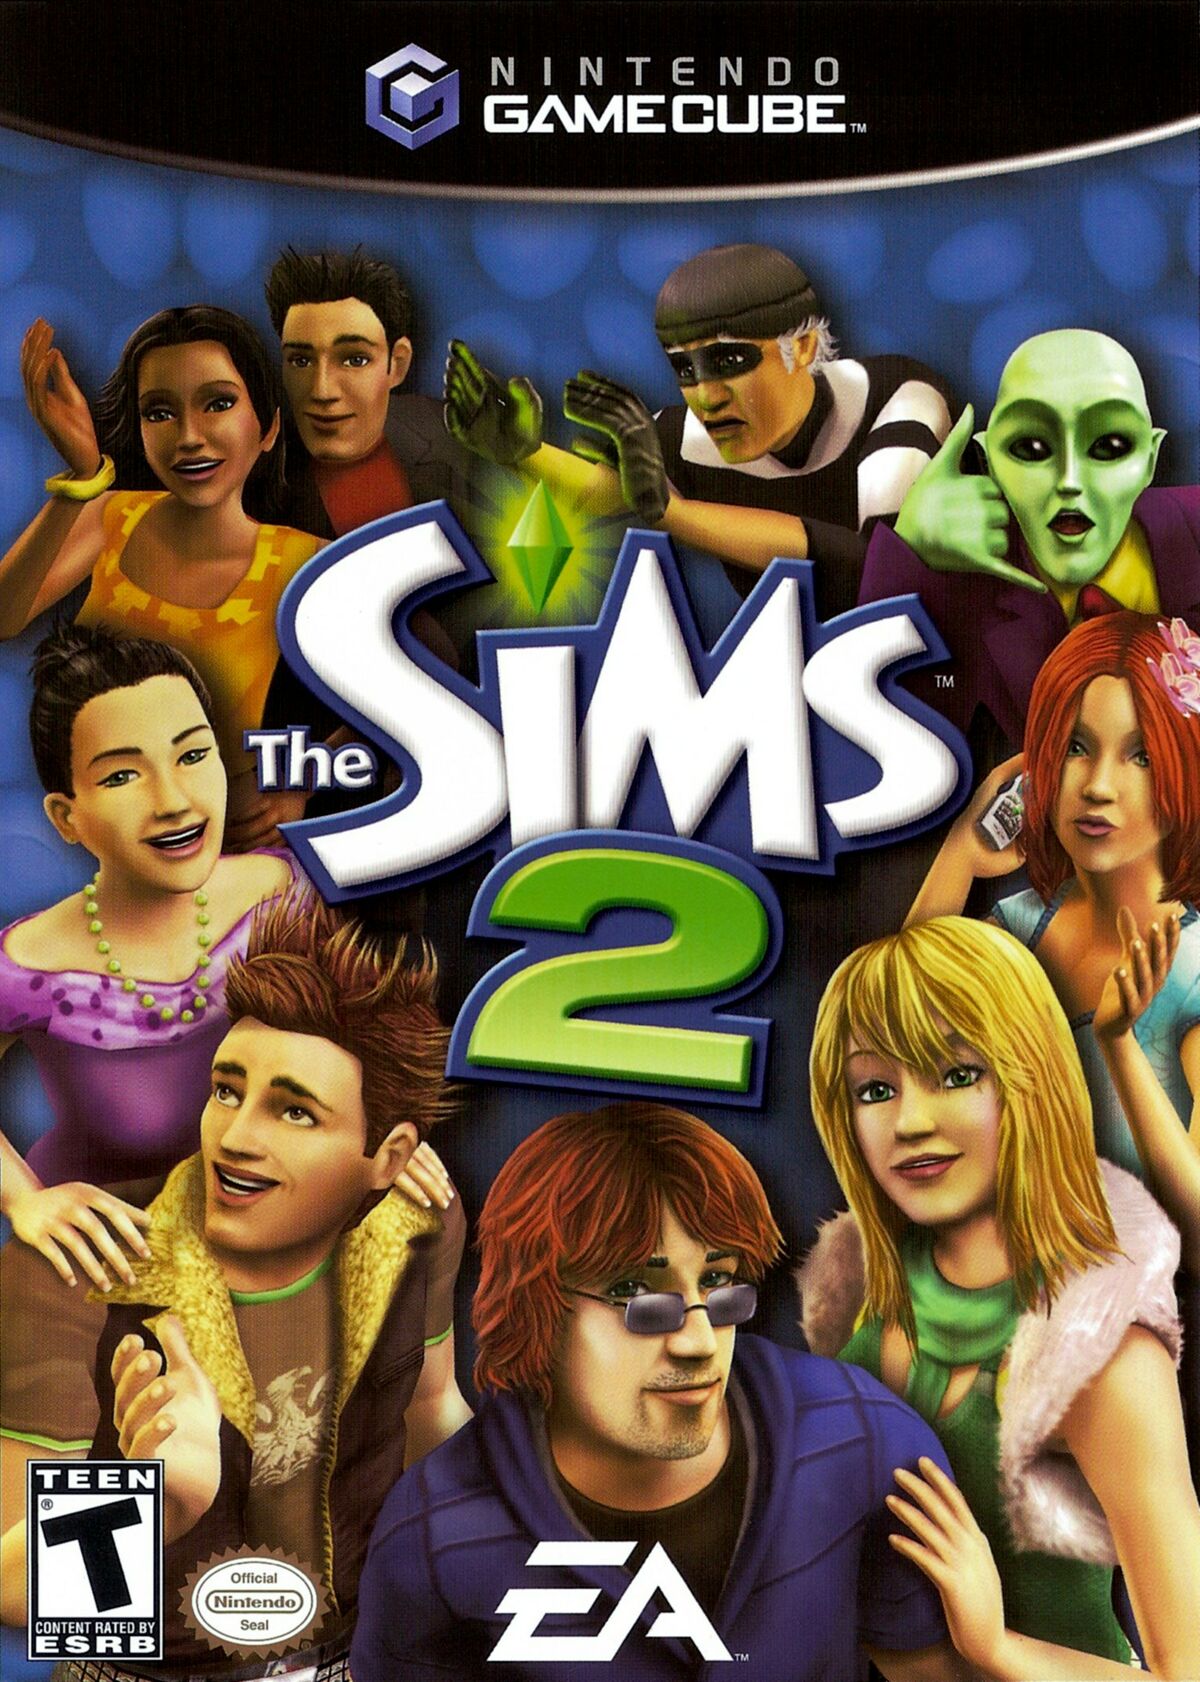 The Sims (video game) - Wikipedia